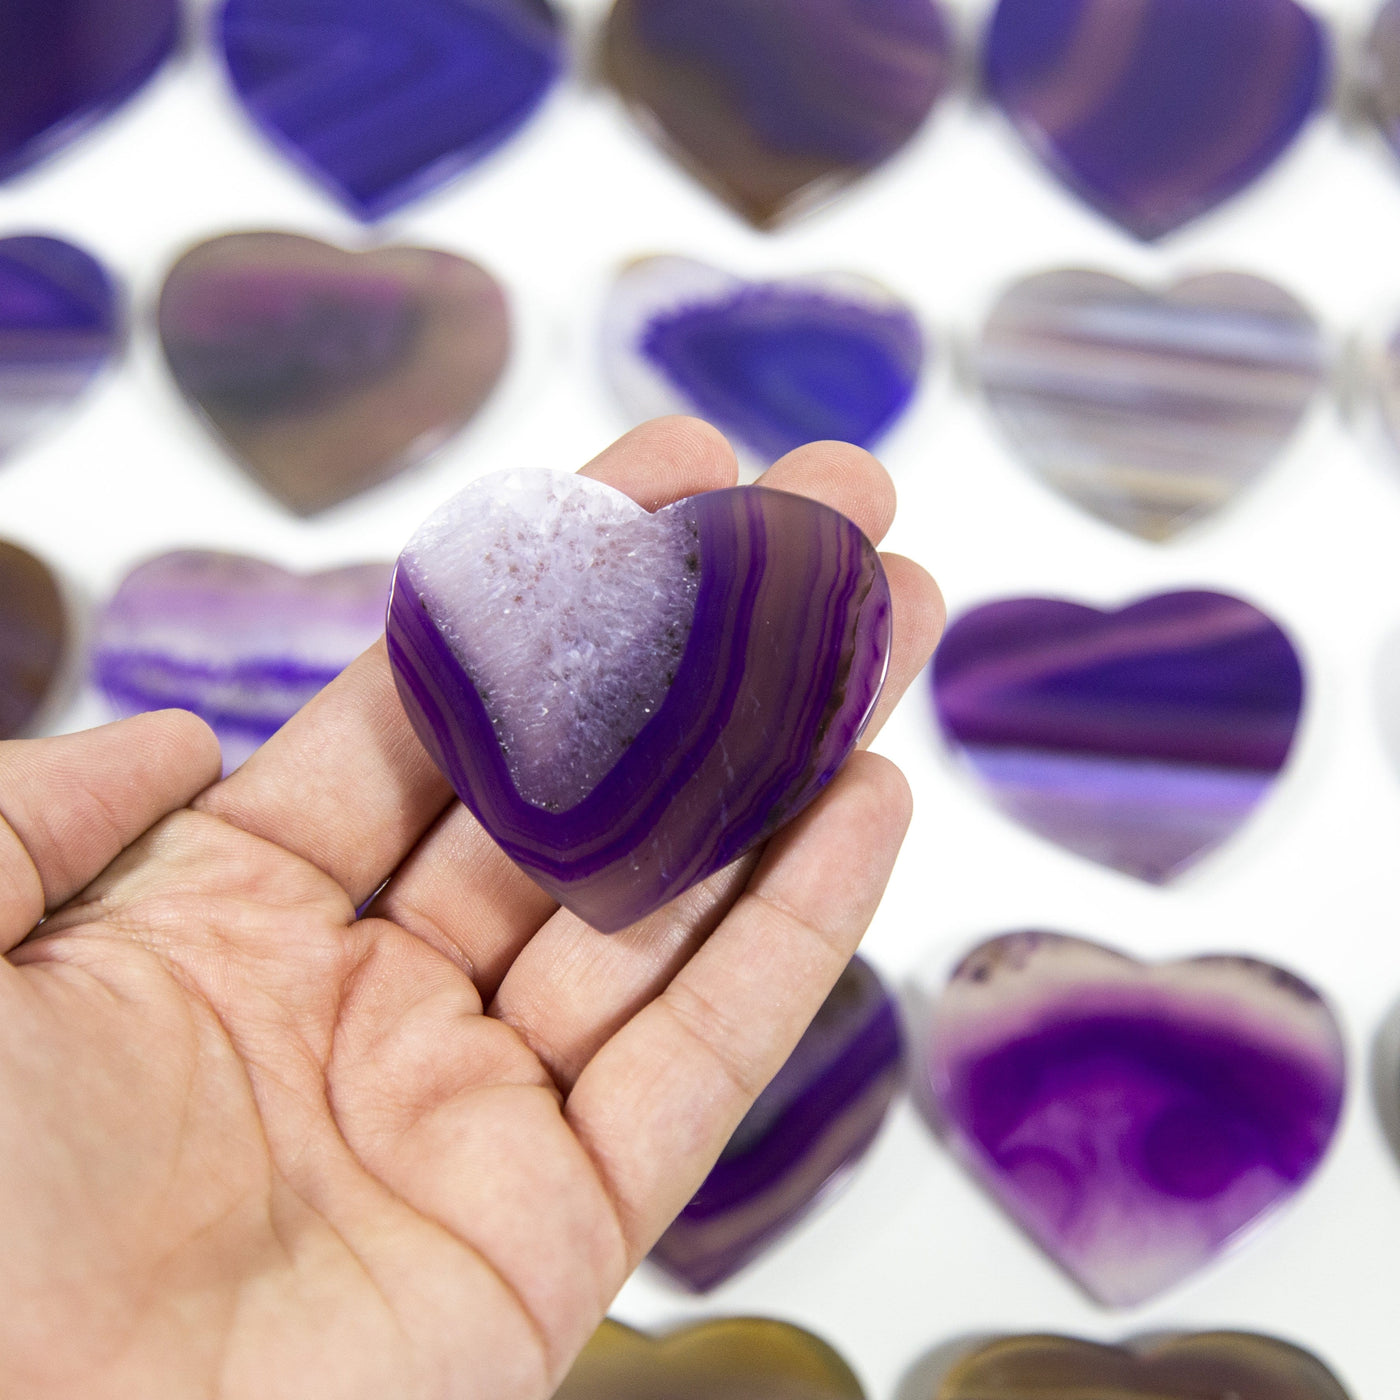 A purple Agate Heart Shaped Cabochon in a hand, multiple agate hearts in the background on a white surface.